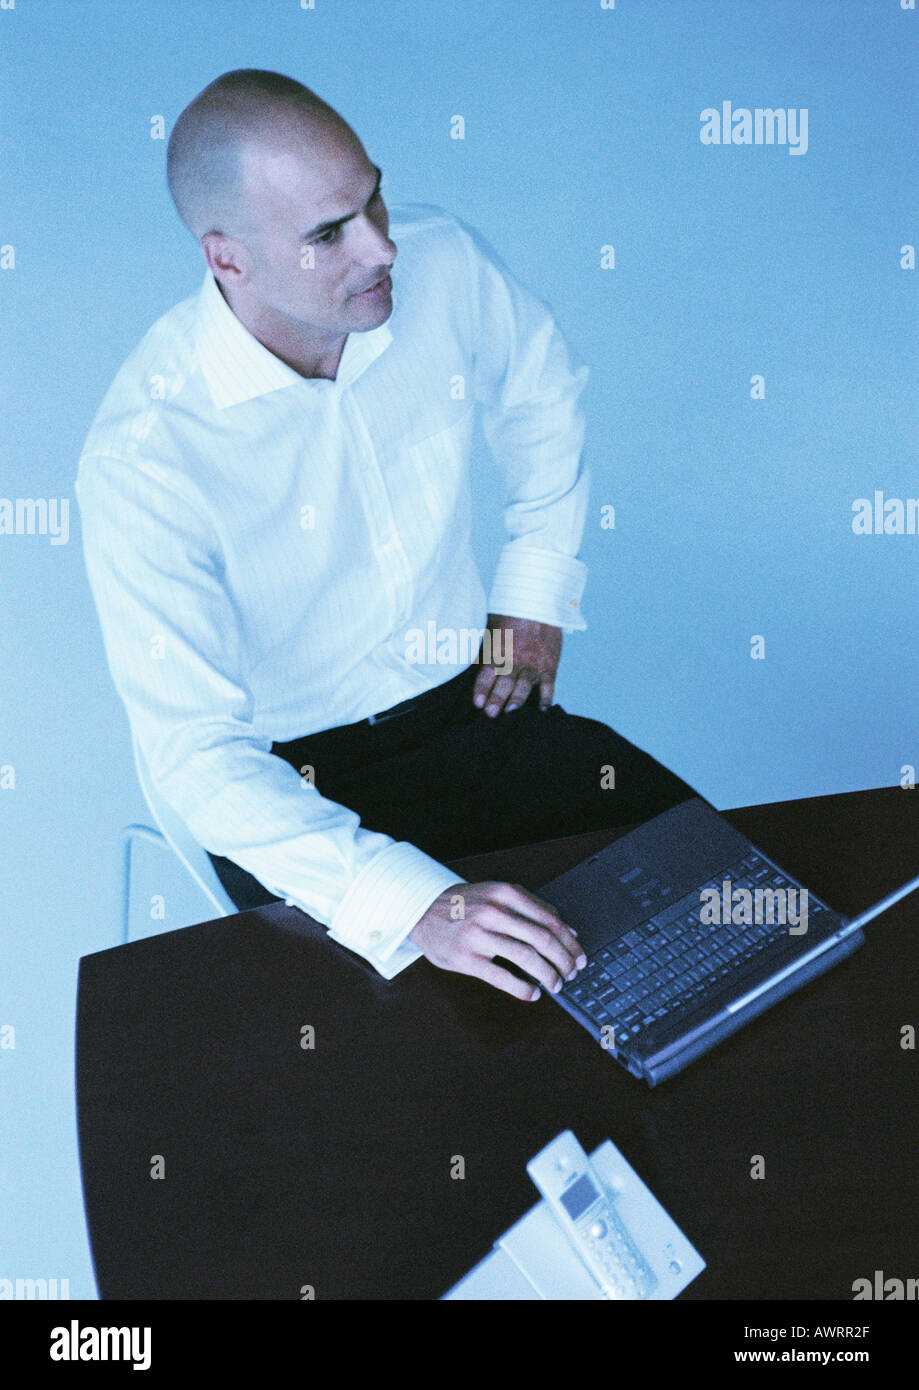 Businessman sitting at desk with laptop computer, high angle view Banque D'Images